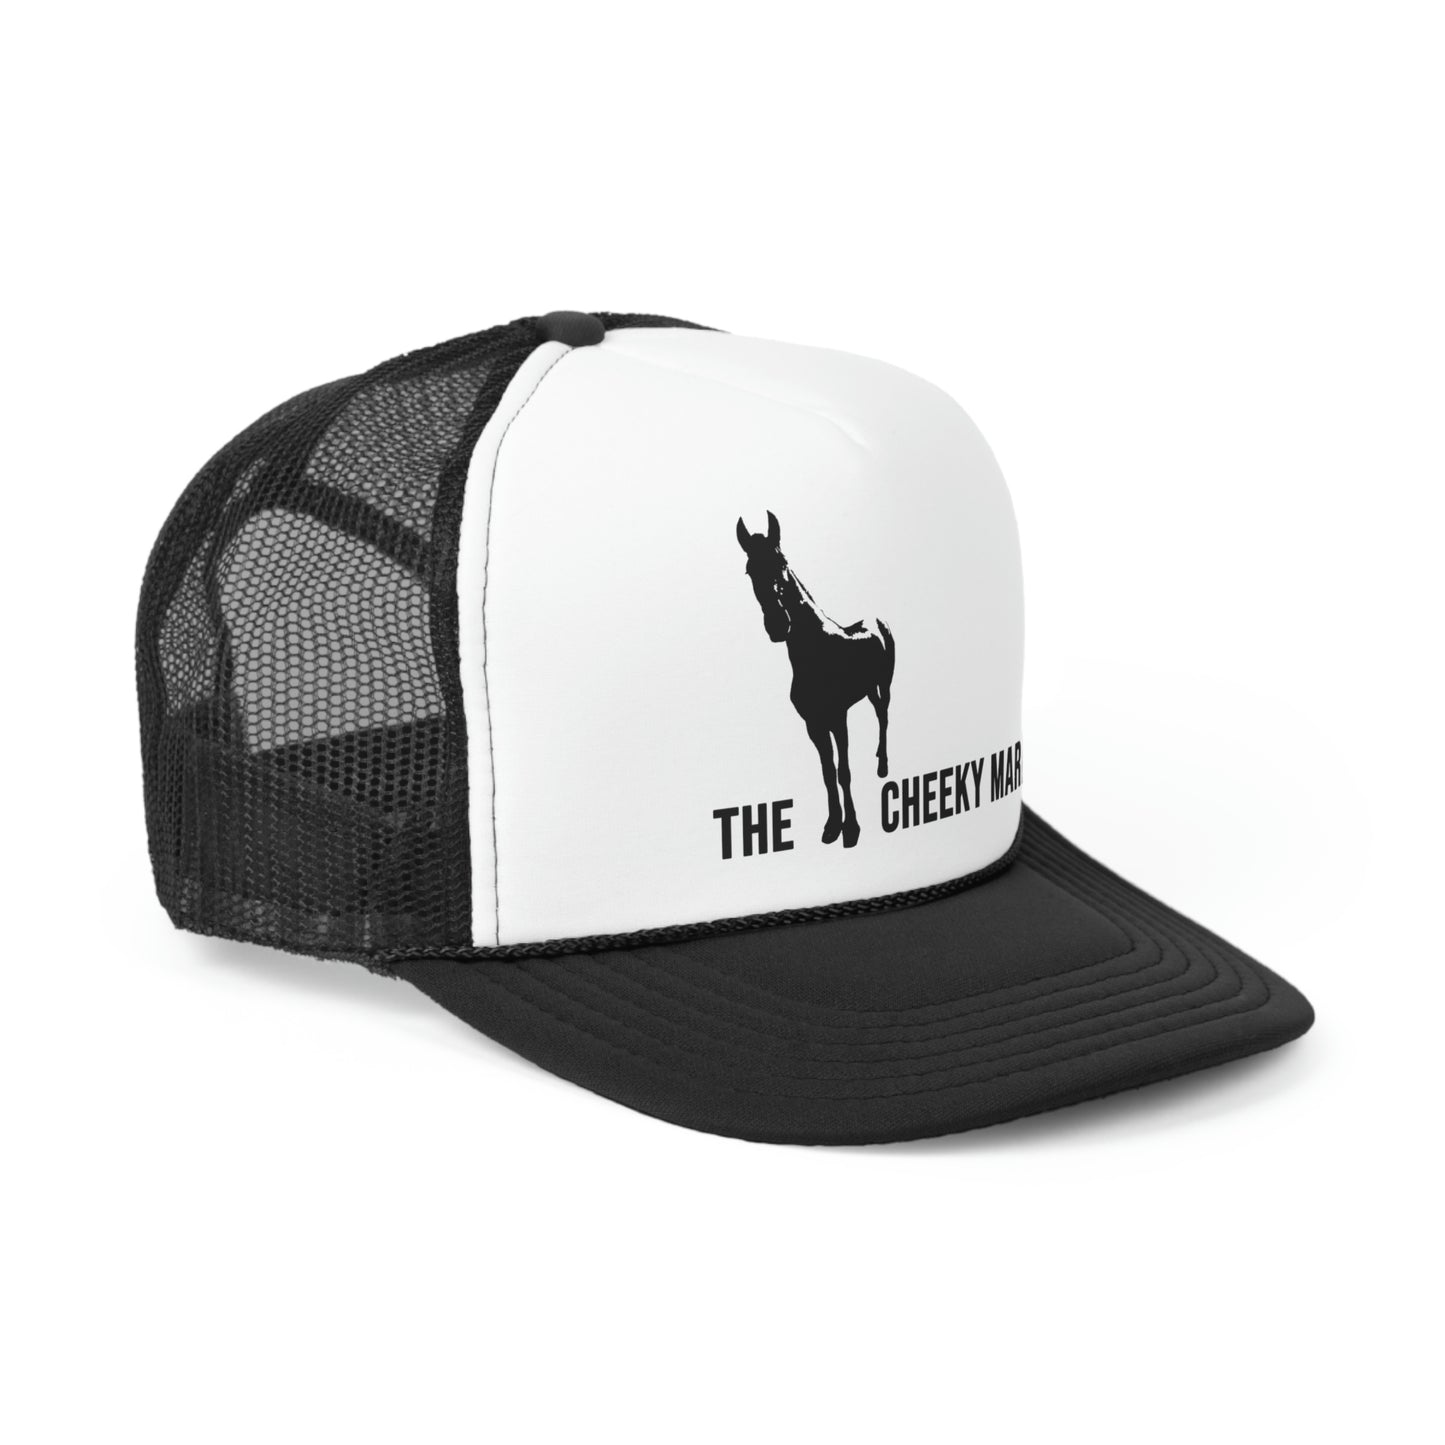 The Cheeky Mare Trucker Hat